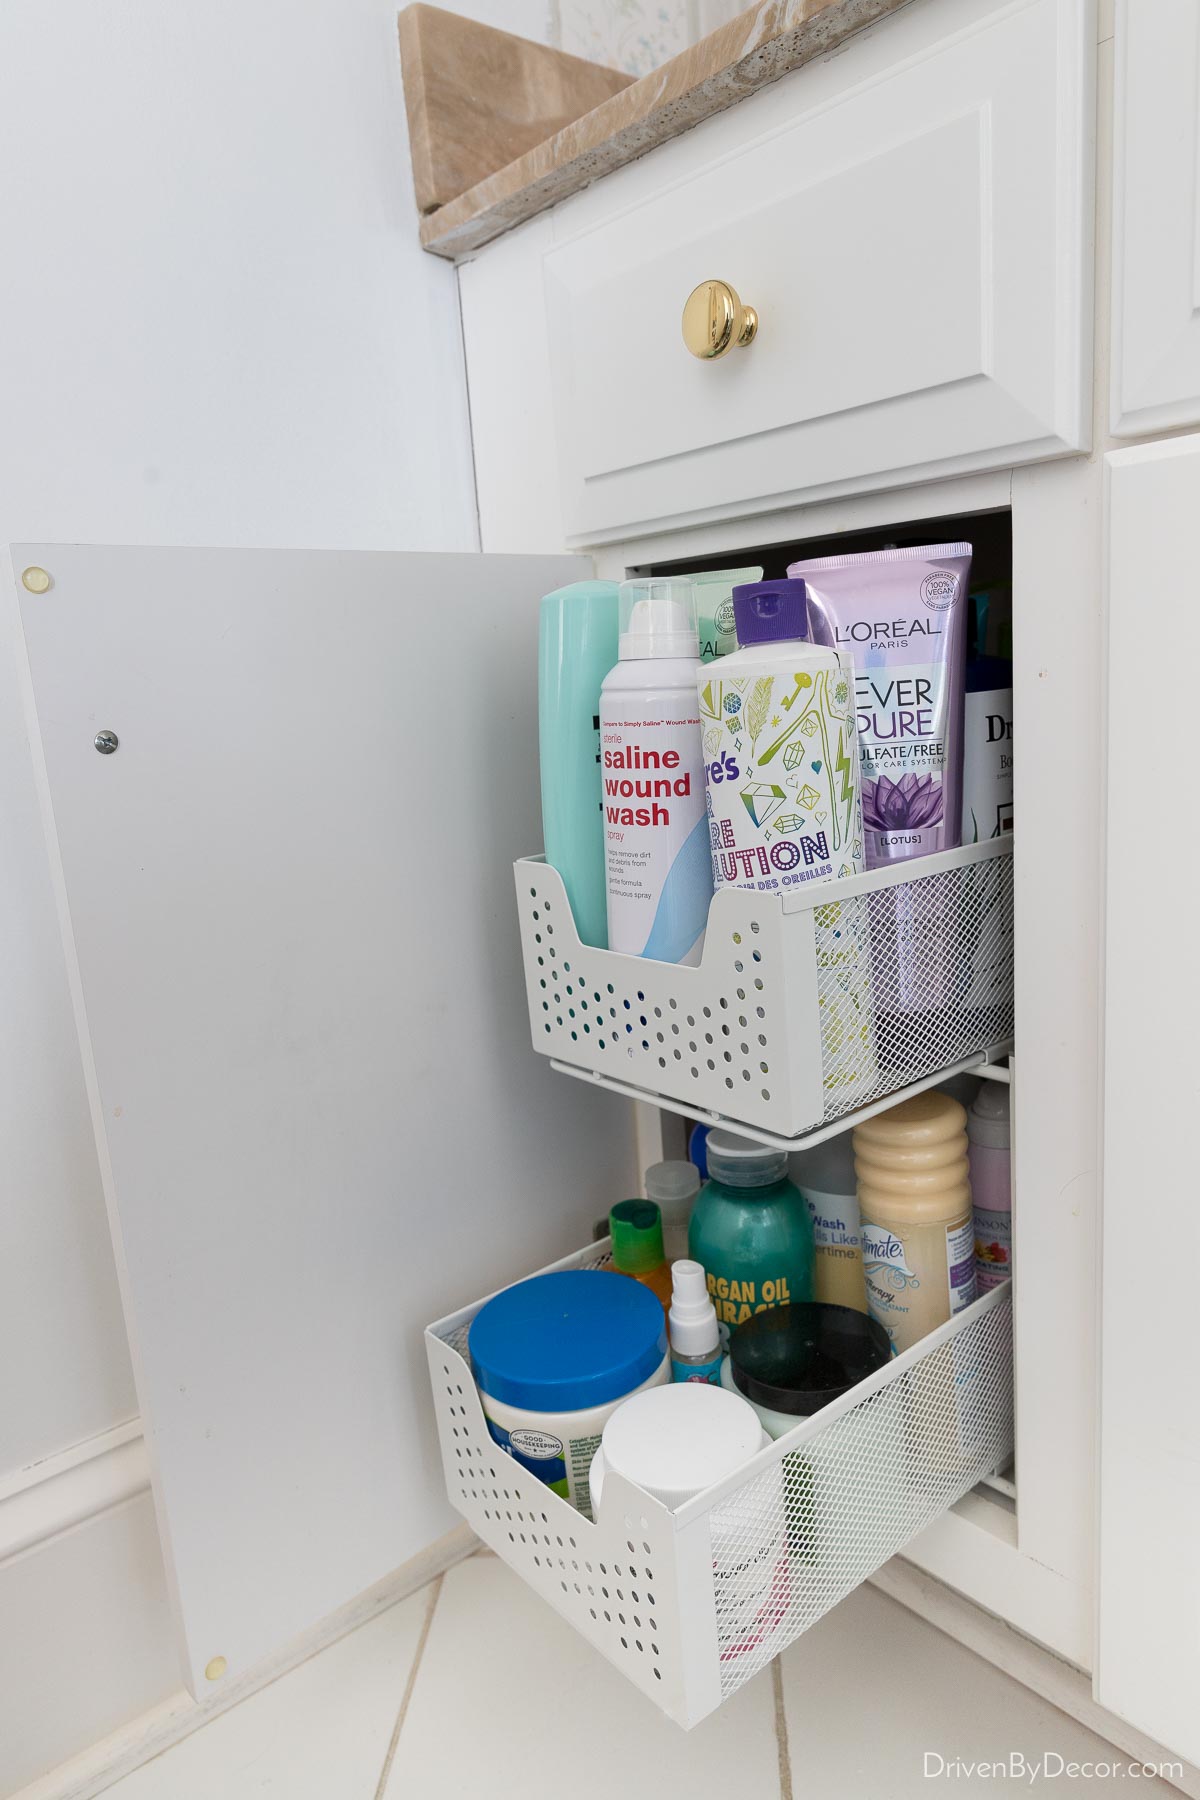 under sink roll outs maximize your cabinet space. www.helpyourshelves.com  Under  sink organization bathroom, Bathroom cabinet organization, Diy bathroom